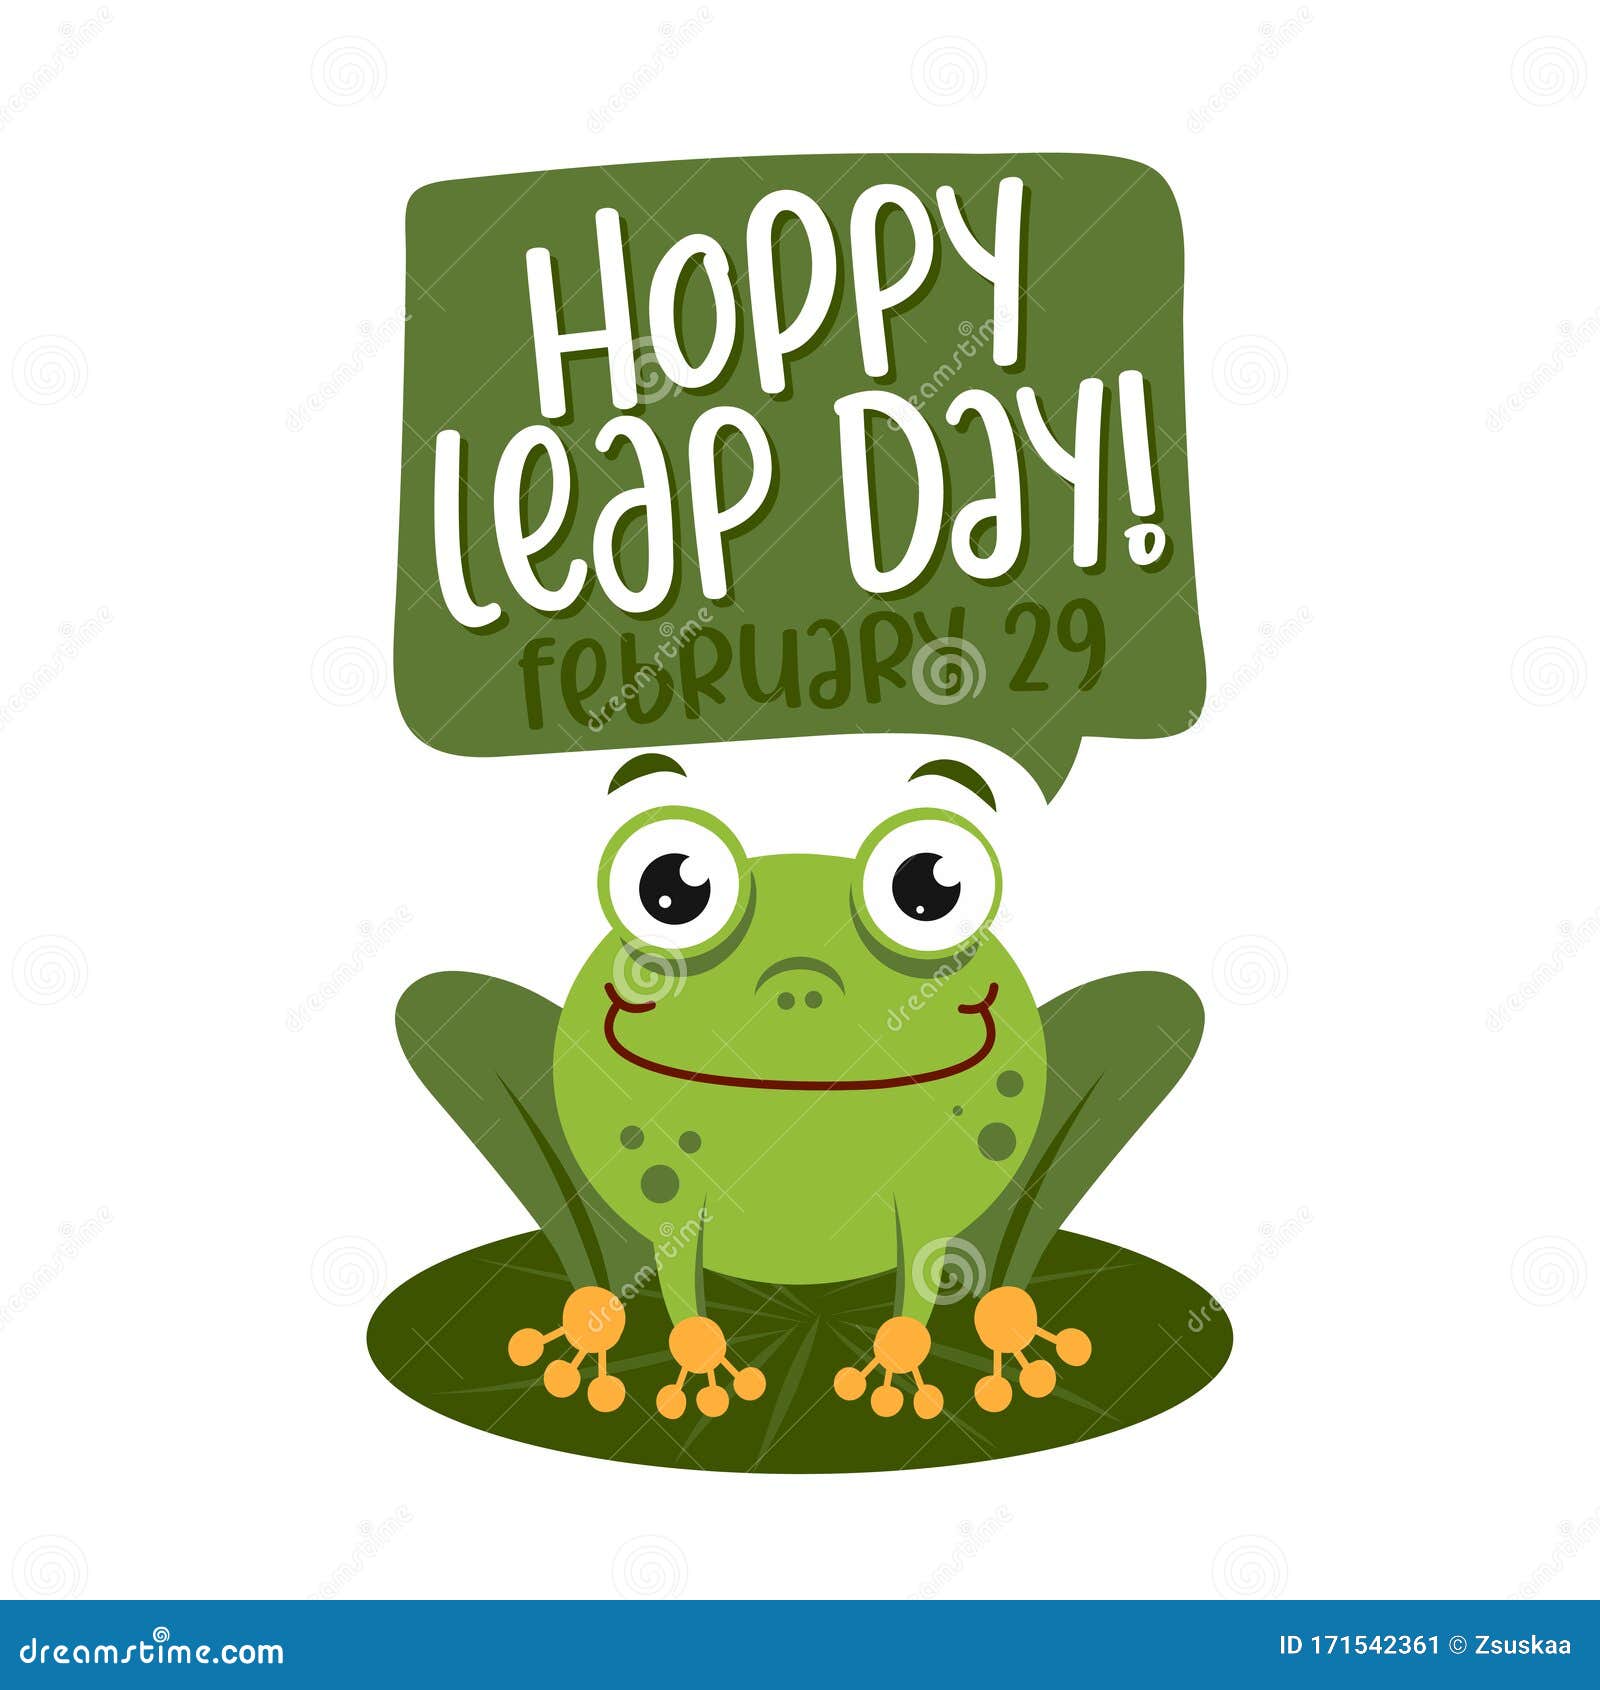 hoppy leap day - leap year 29 february calendar page